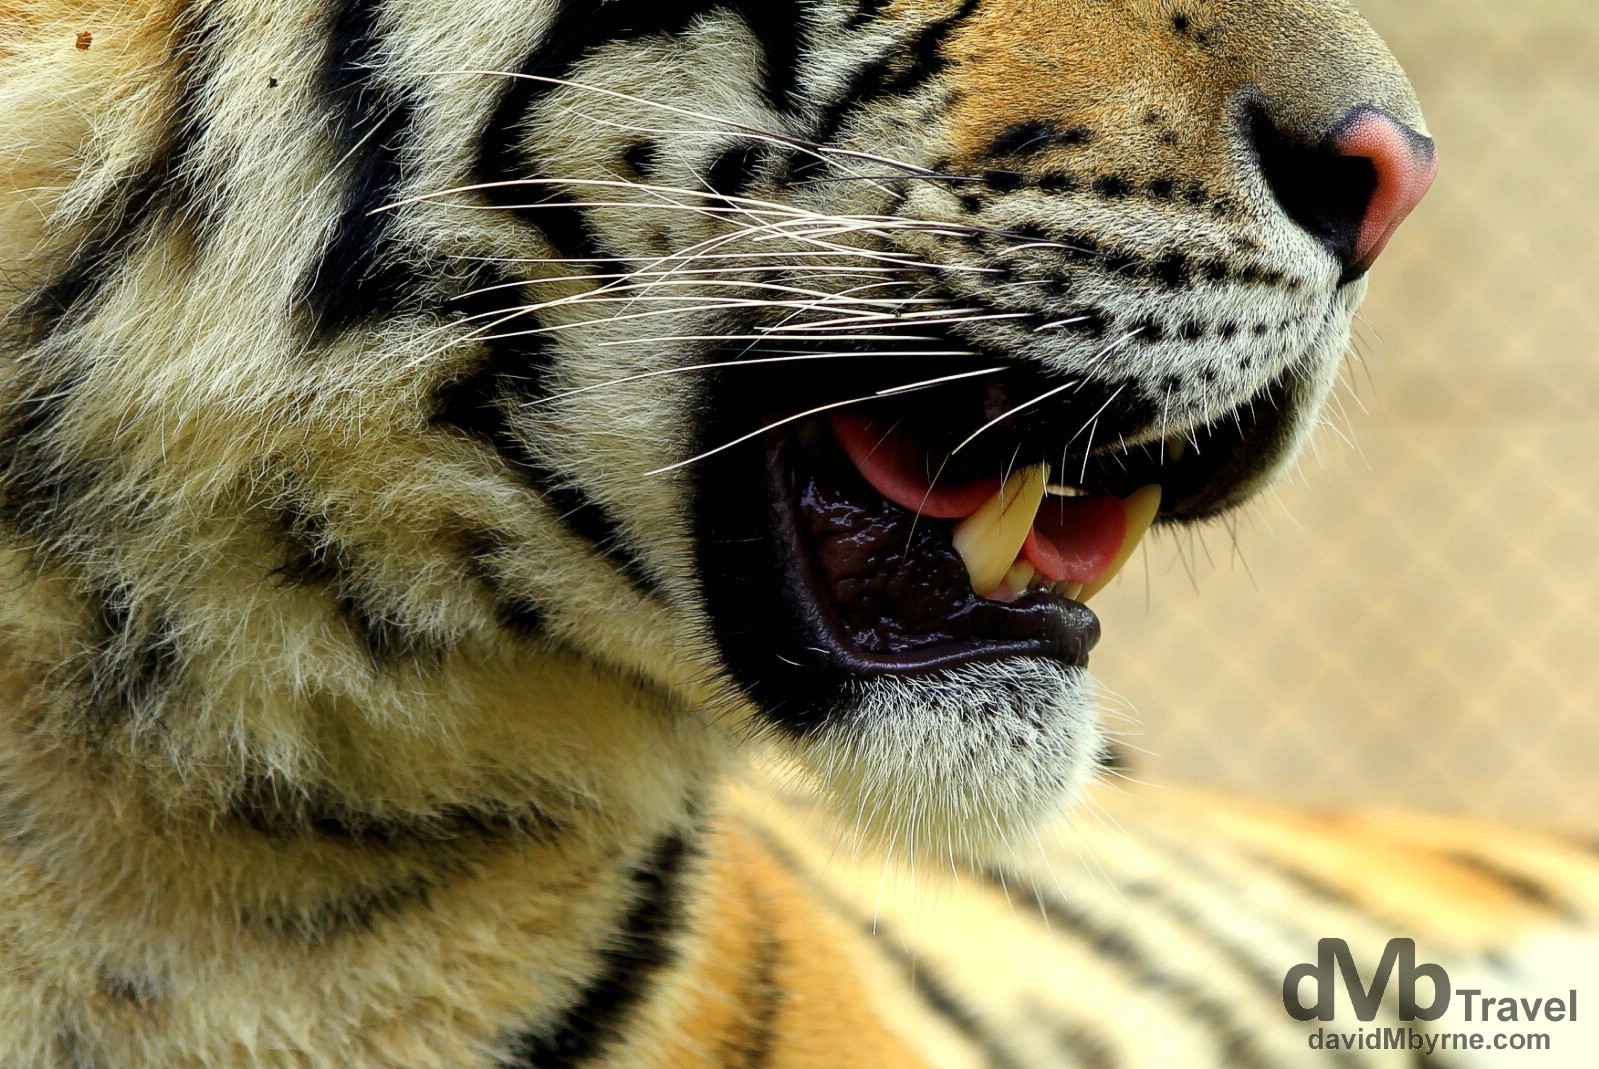 Whiskers & teeth. A tiger in Tiger Kingdom on the outskirts of Chiang Mai, northern Thailand. March 14th 2012.